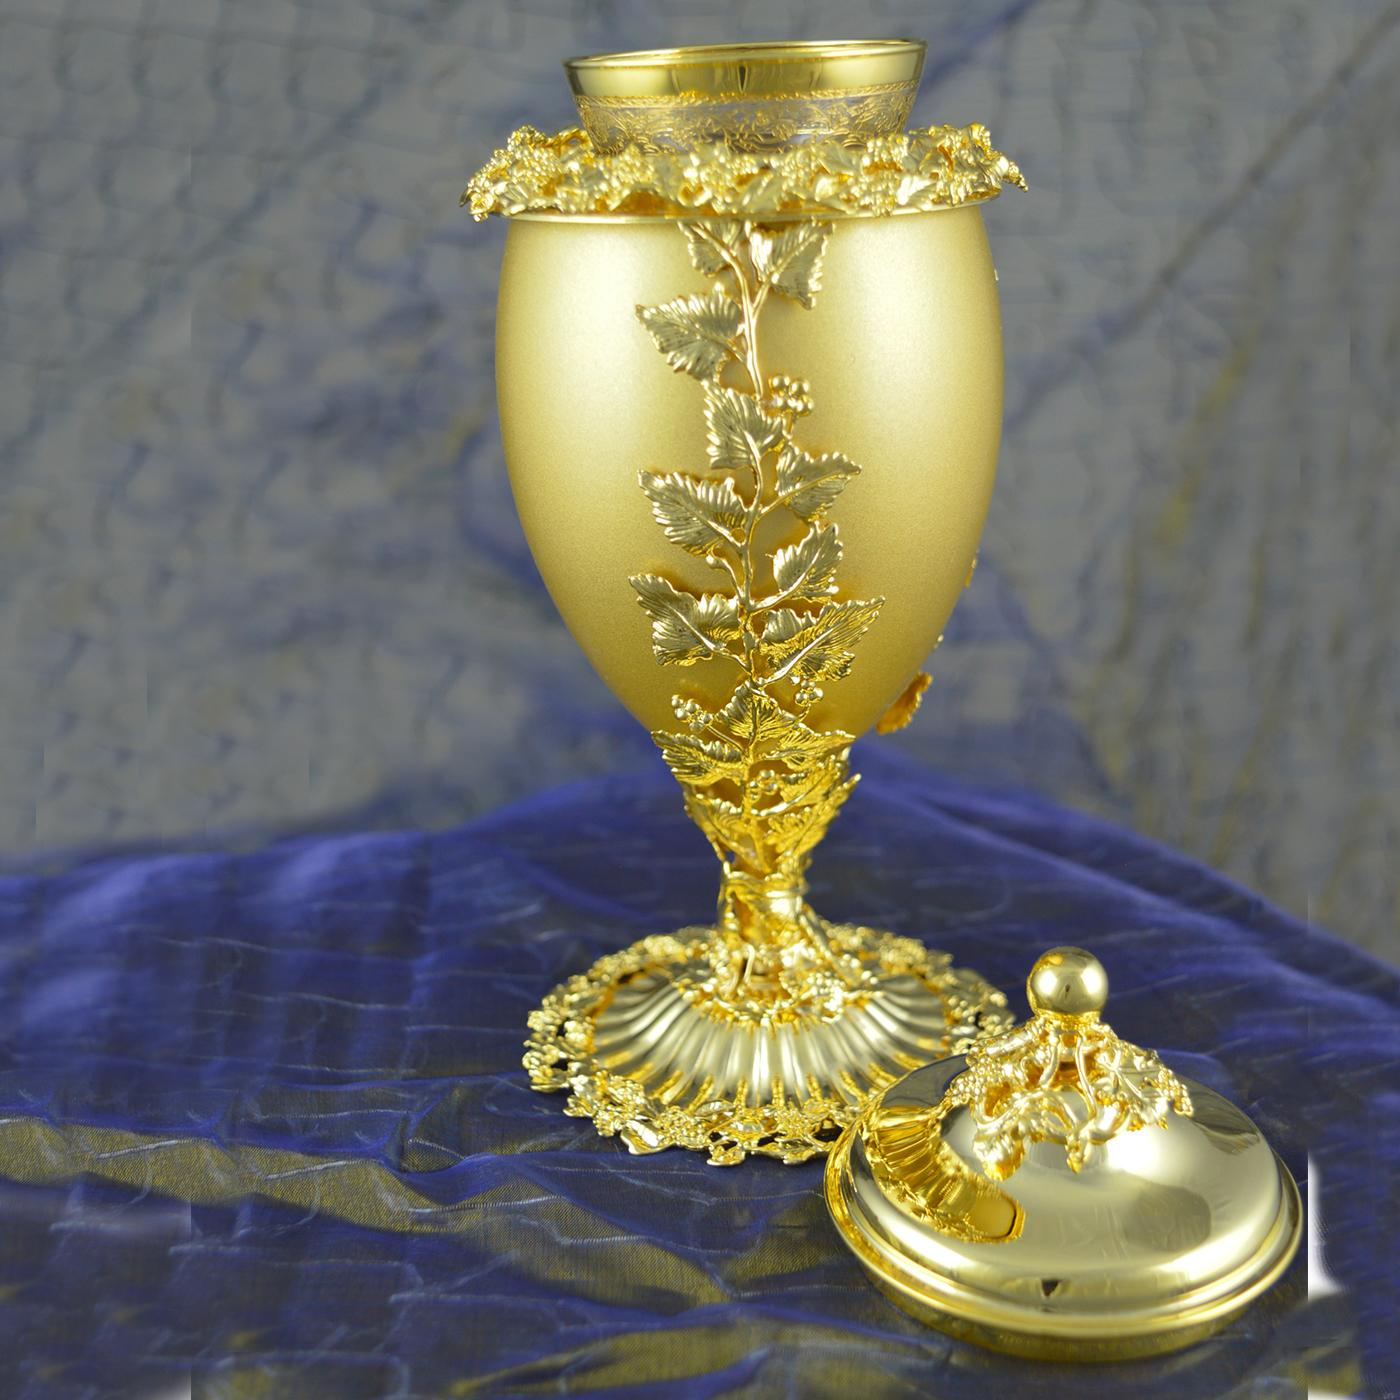 Inspired by the lavish tableware pieces from the Florentine Renaissance, this caviar bowl with lid will be a stunning addition to a special dinner party. Its elongated shape is crafted of metal entirely finished with gold to add an opulent accent to